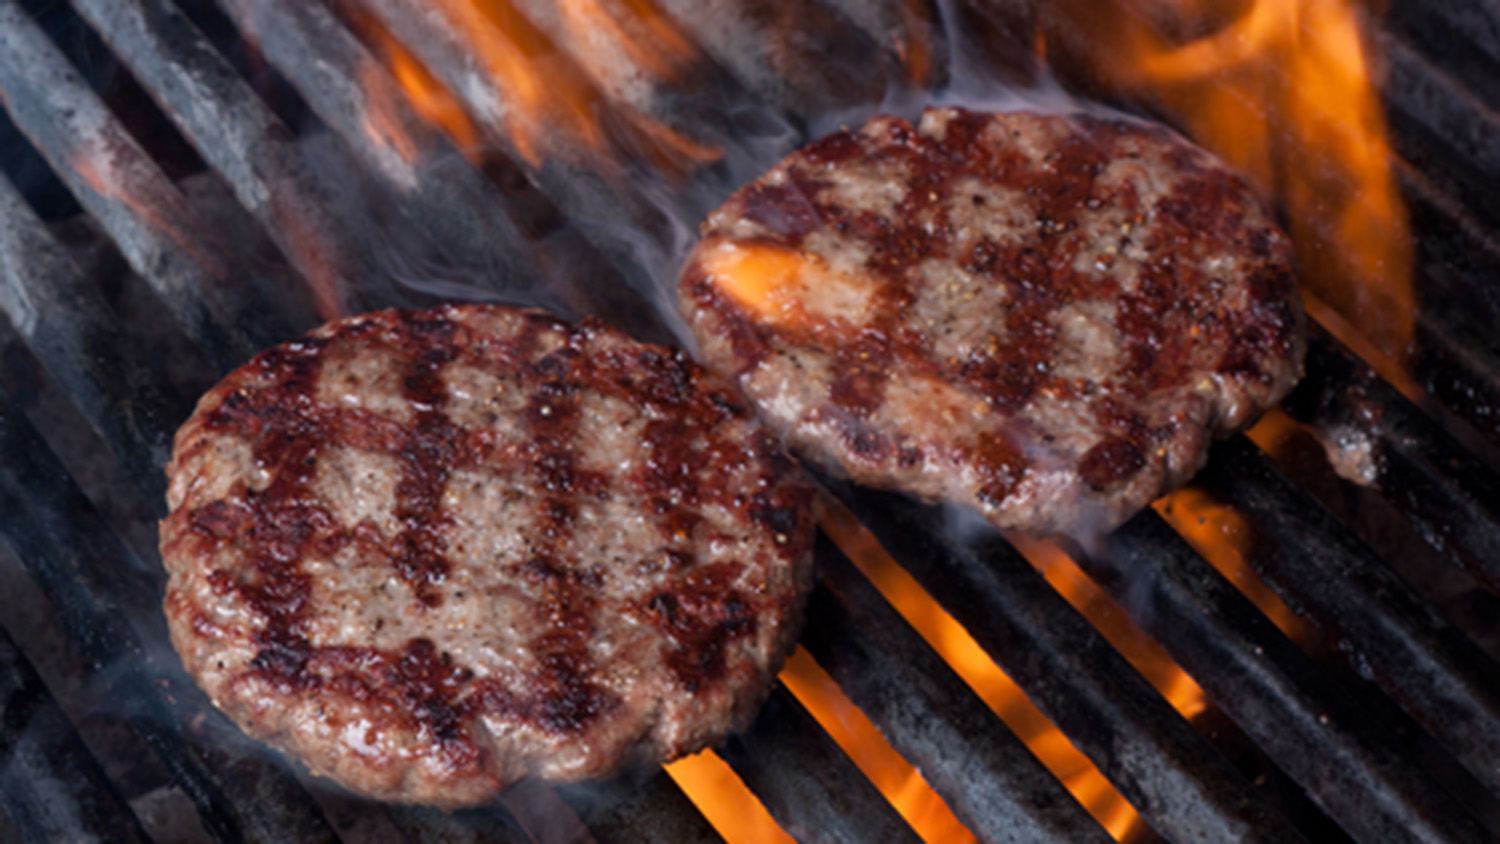 5 things you should know about grilling burgers - College of Agriculture  and Life Sciences